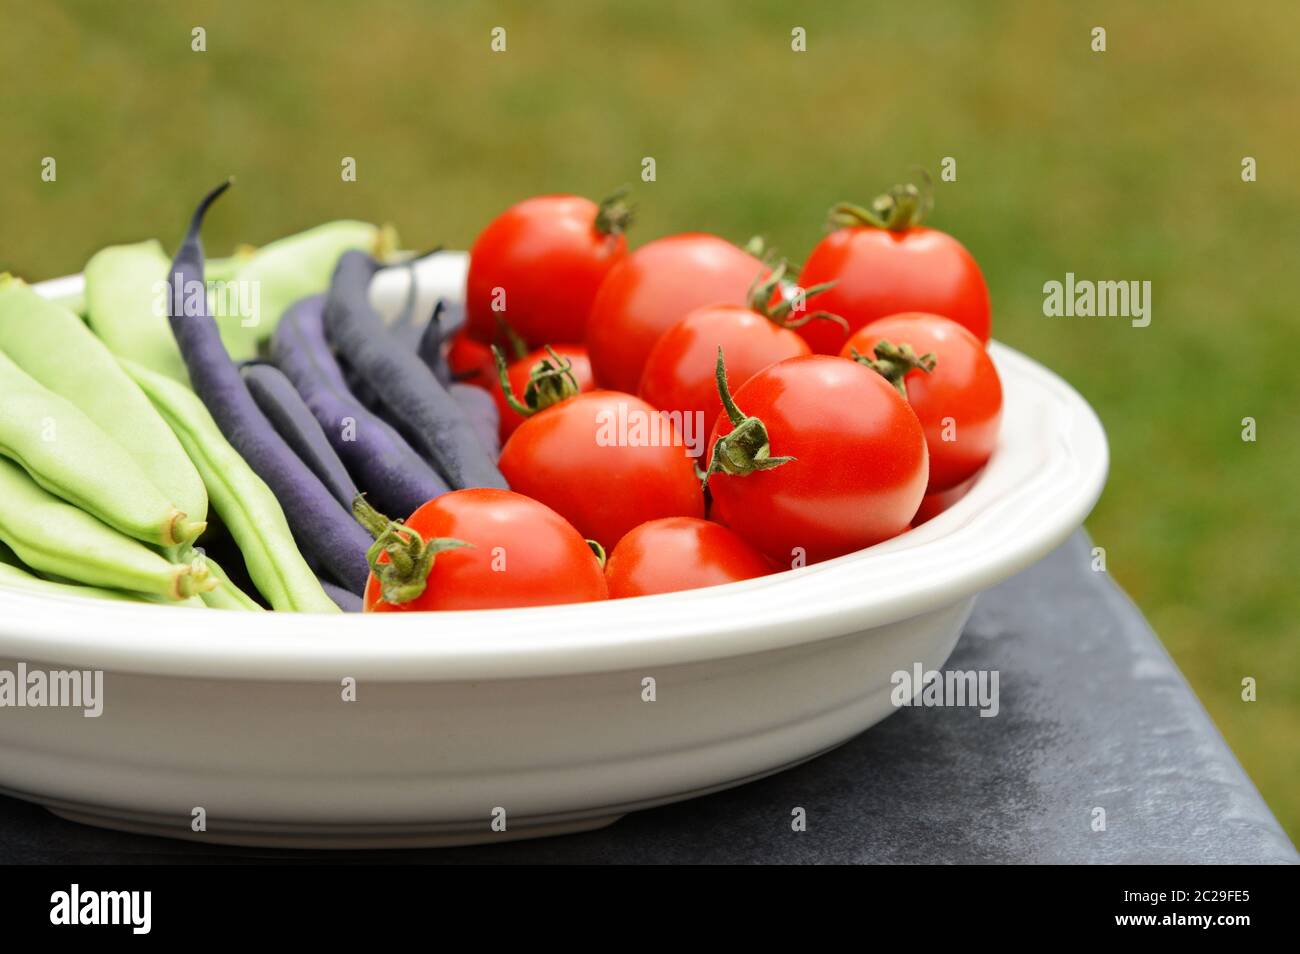 Calypso and French beans in a ceramic dish with ripe red tomatoes on a table outside Stock Photo